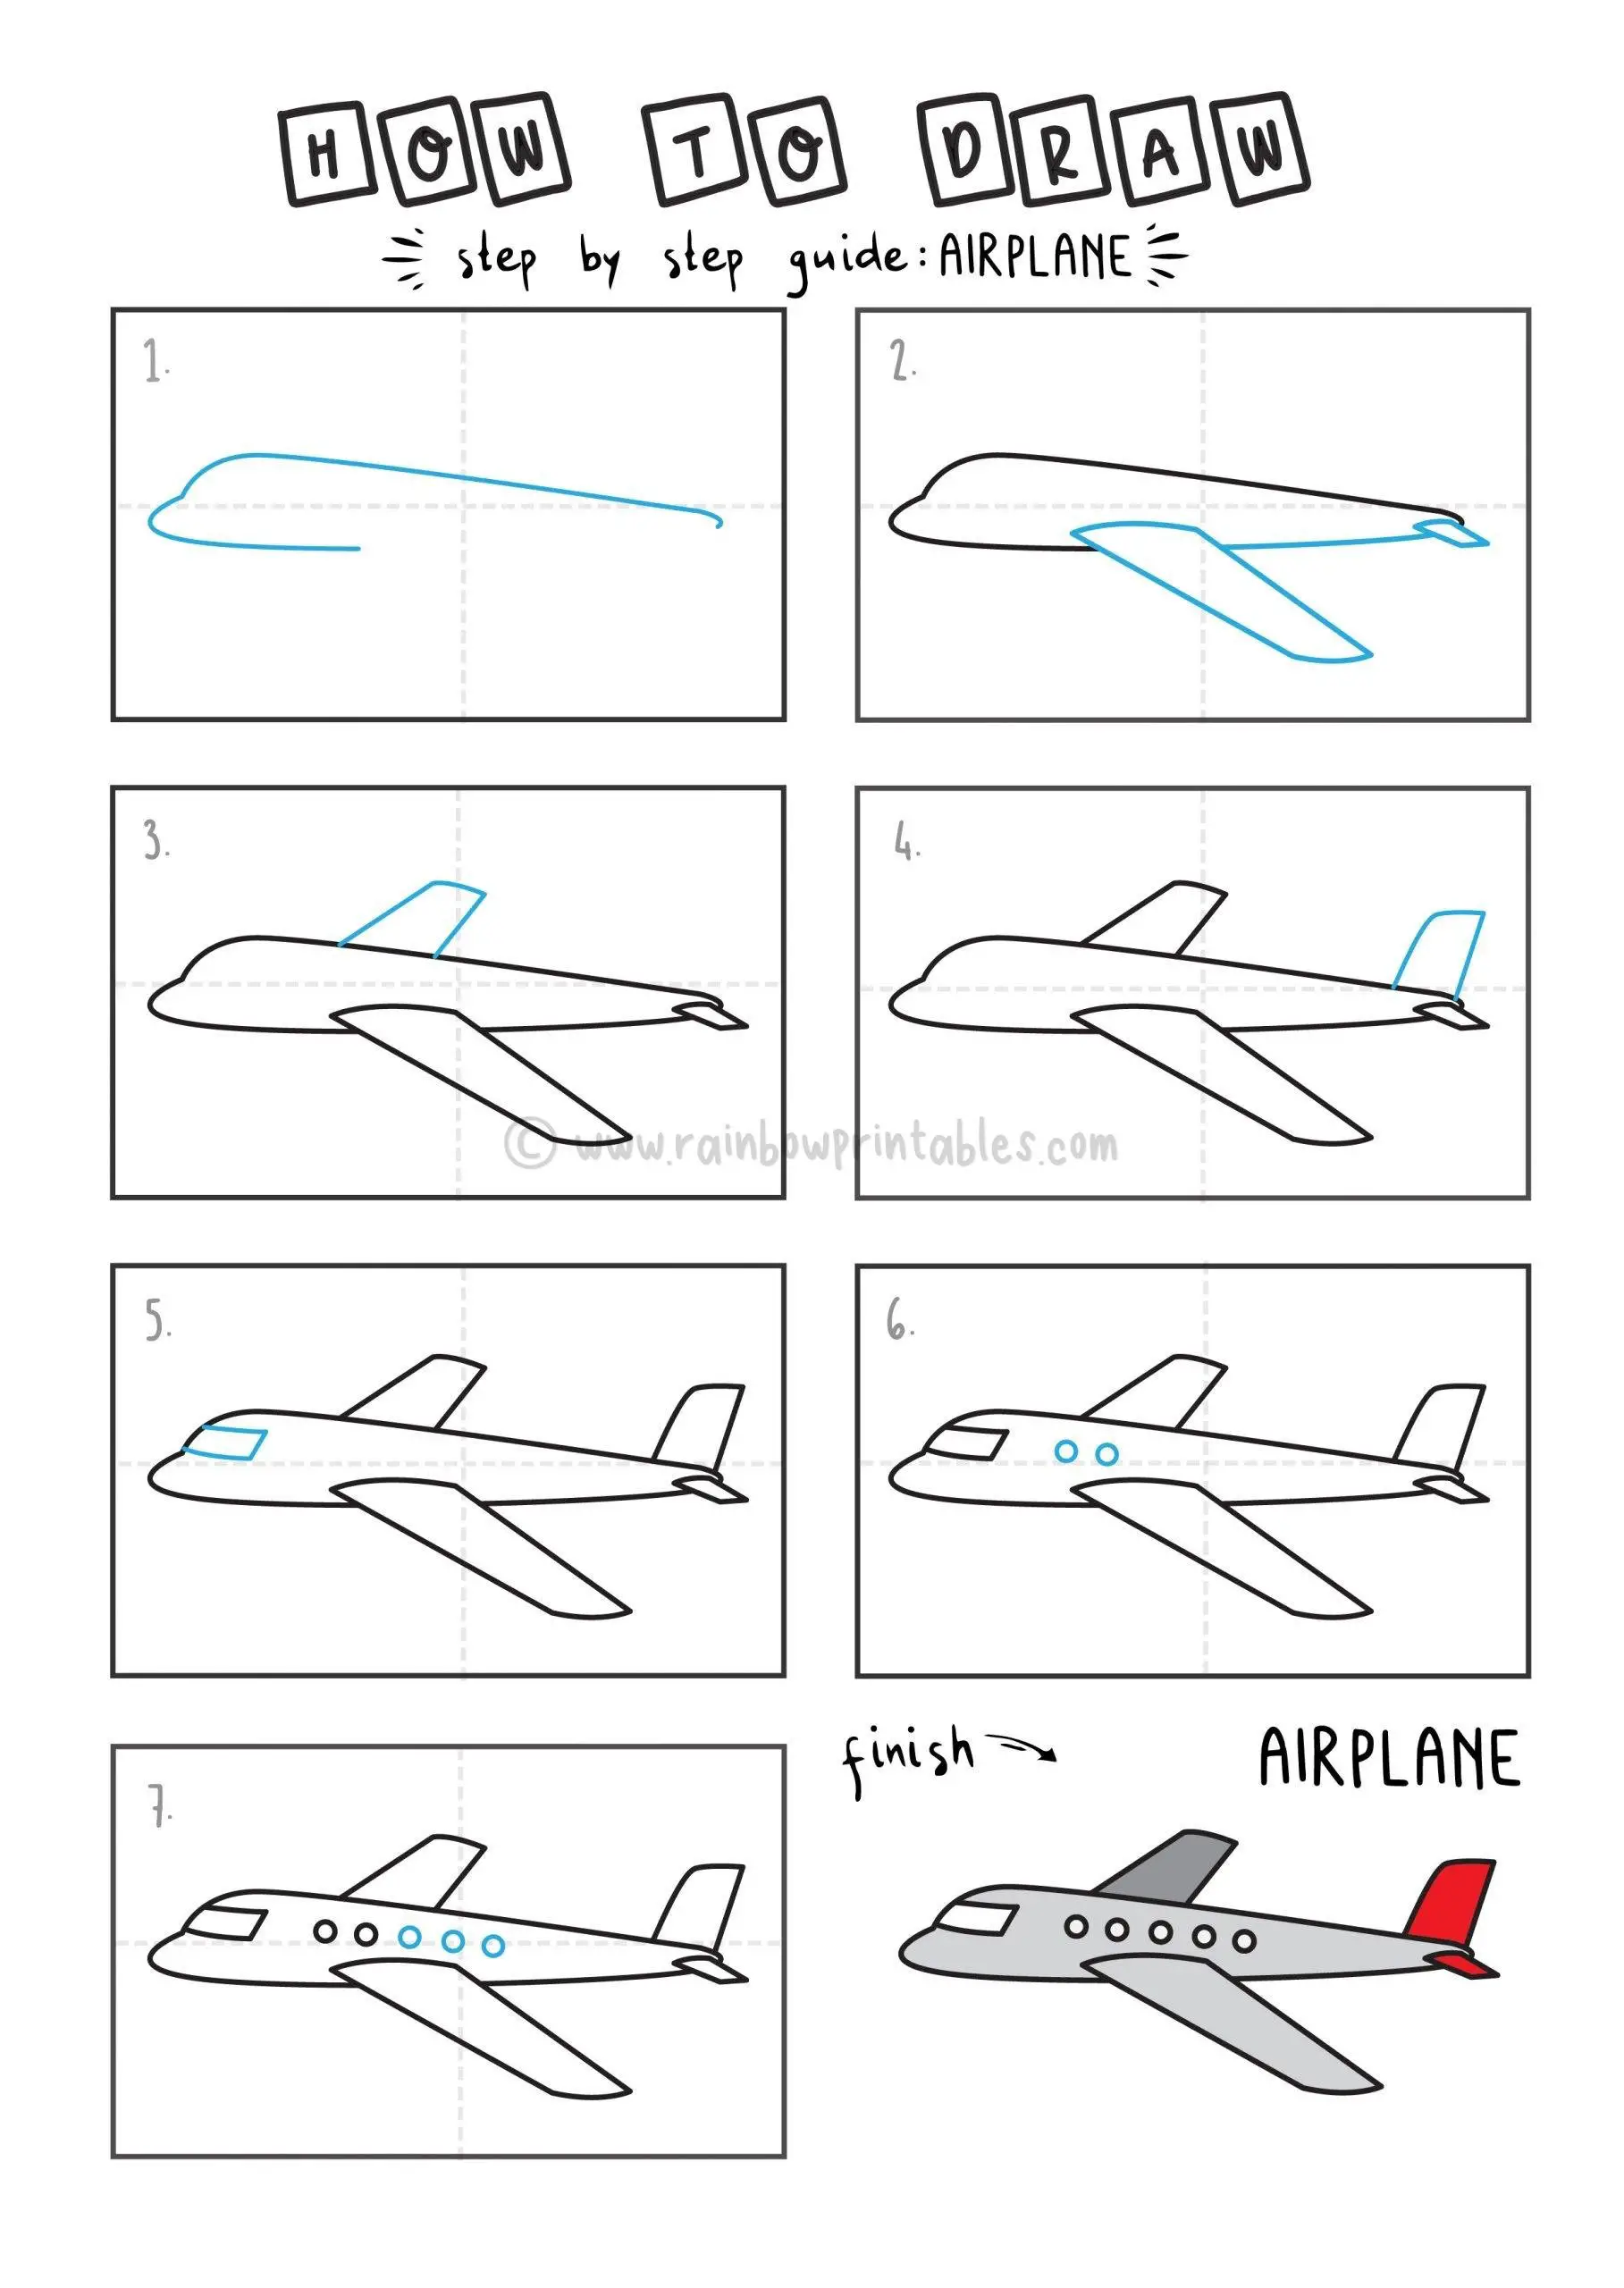 HOW TO DRAW AIRPLANE FOR YOUNG KIDS EASY DRAWINGS ART GUIDE STEP BY STEP